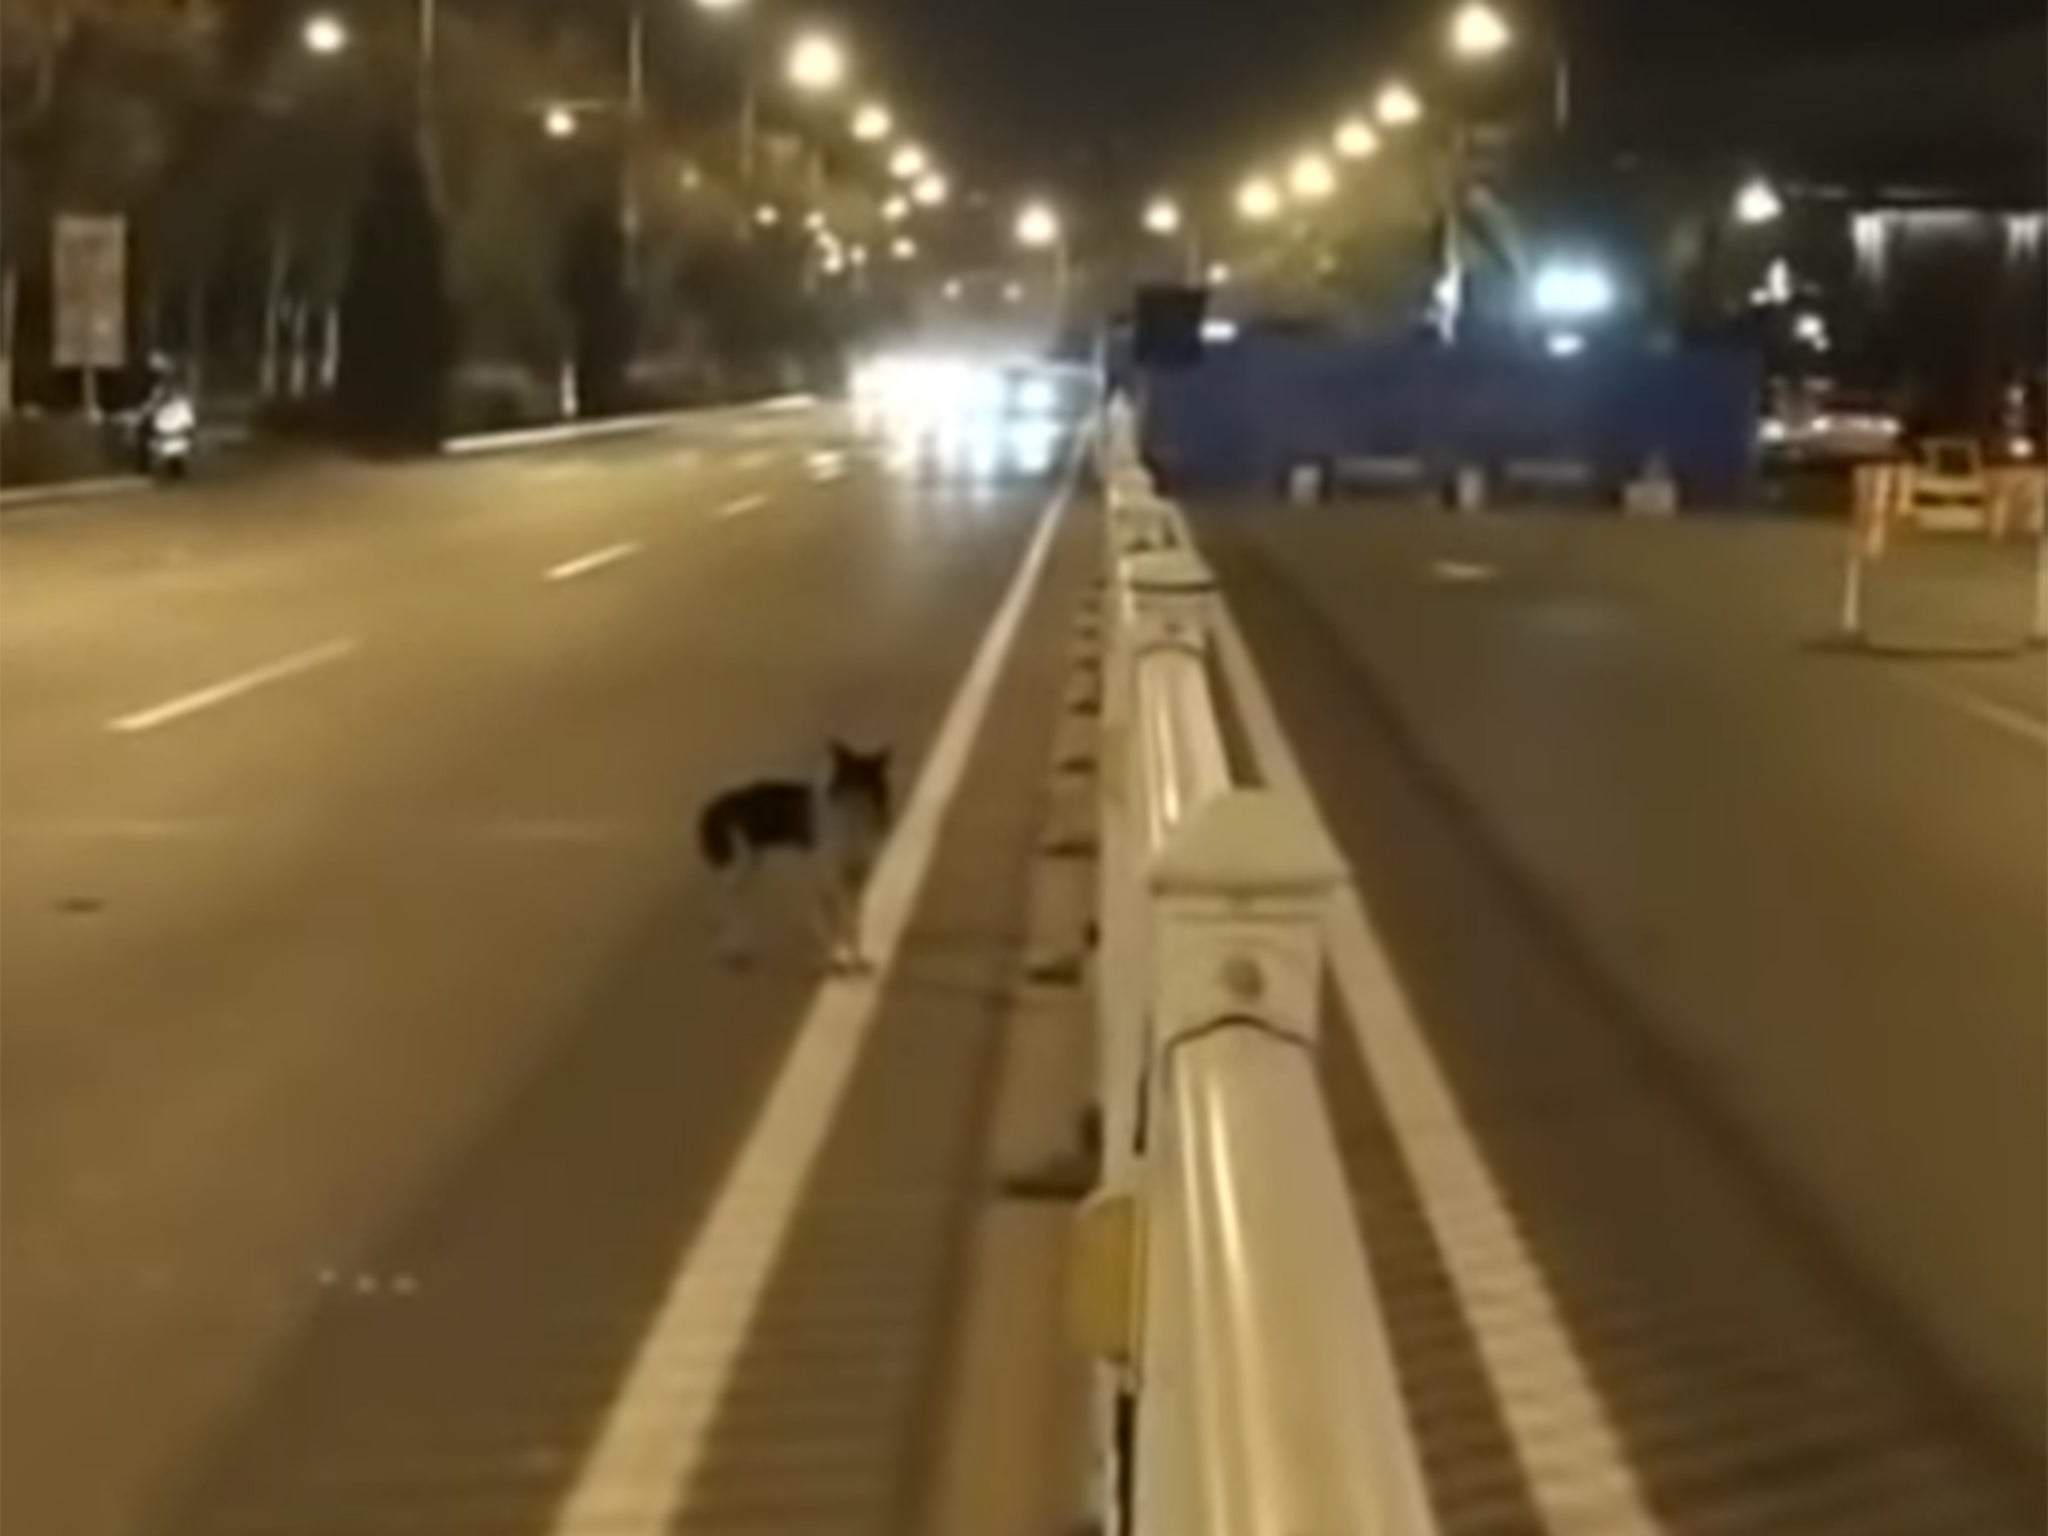 The dog has been seen waiting by the road in Inner Mongolia